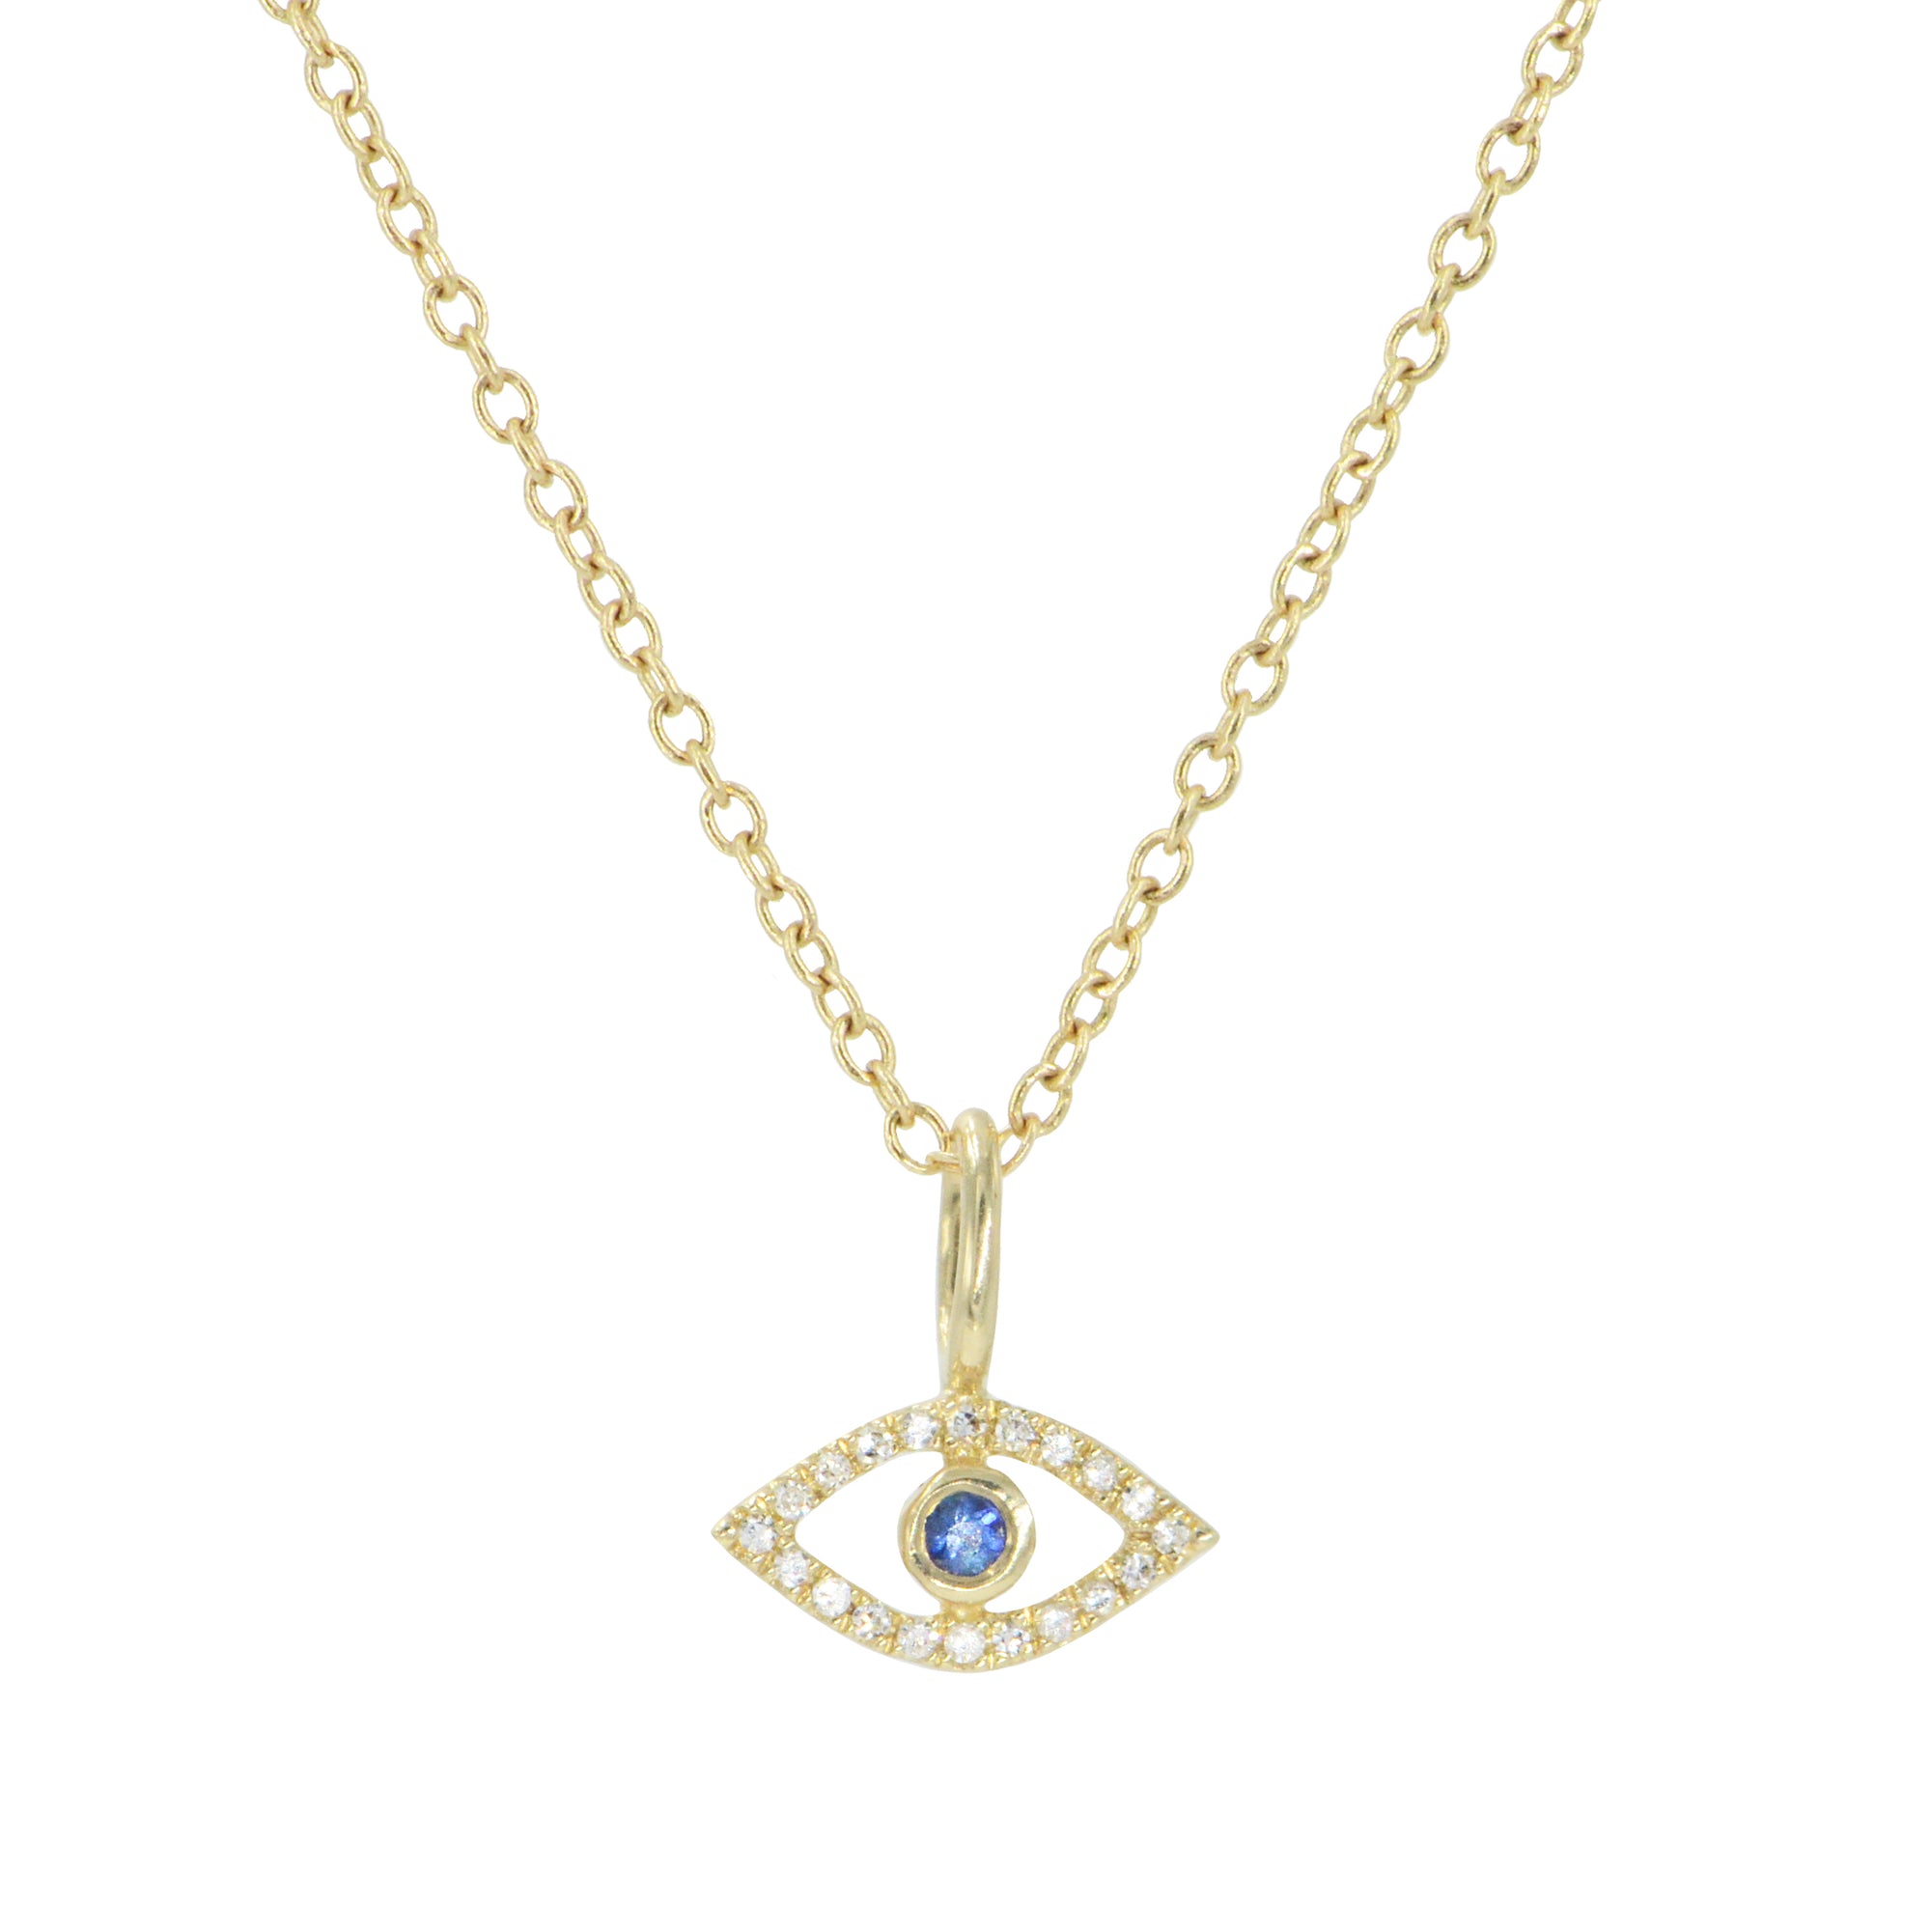 Evil eye and blue sapphire necklace on simple chain